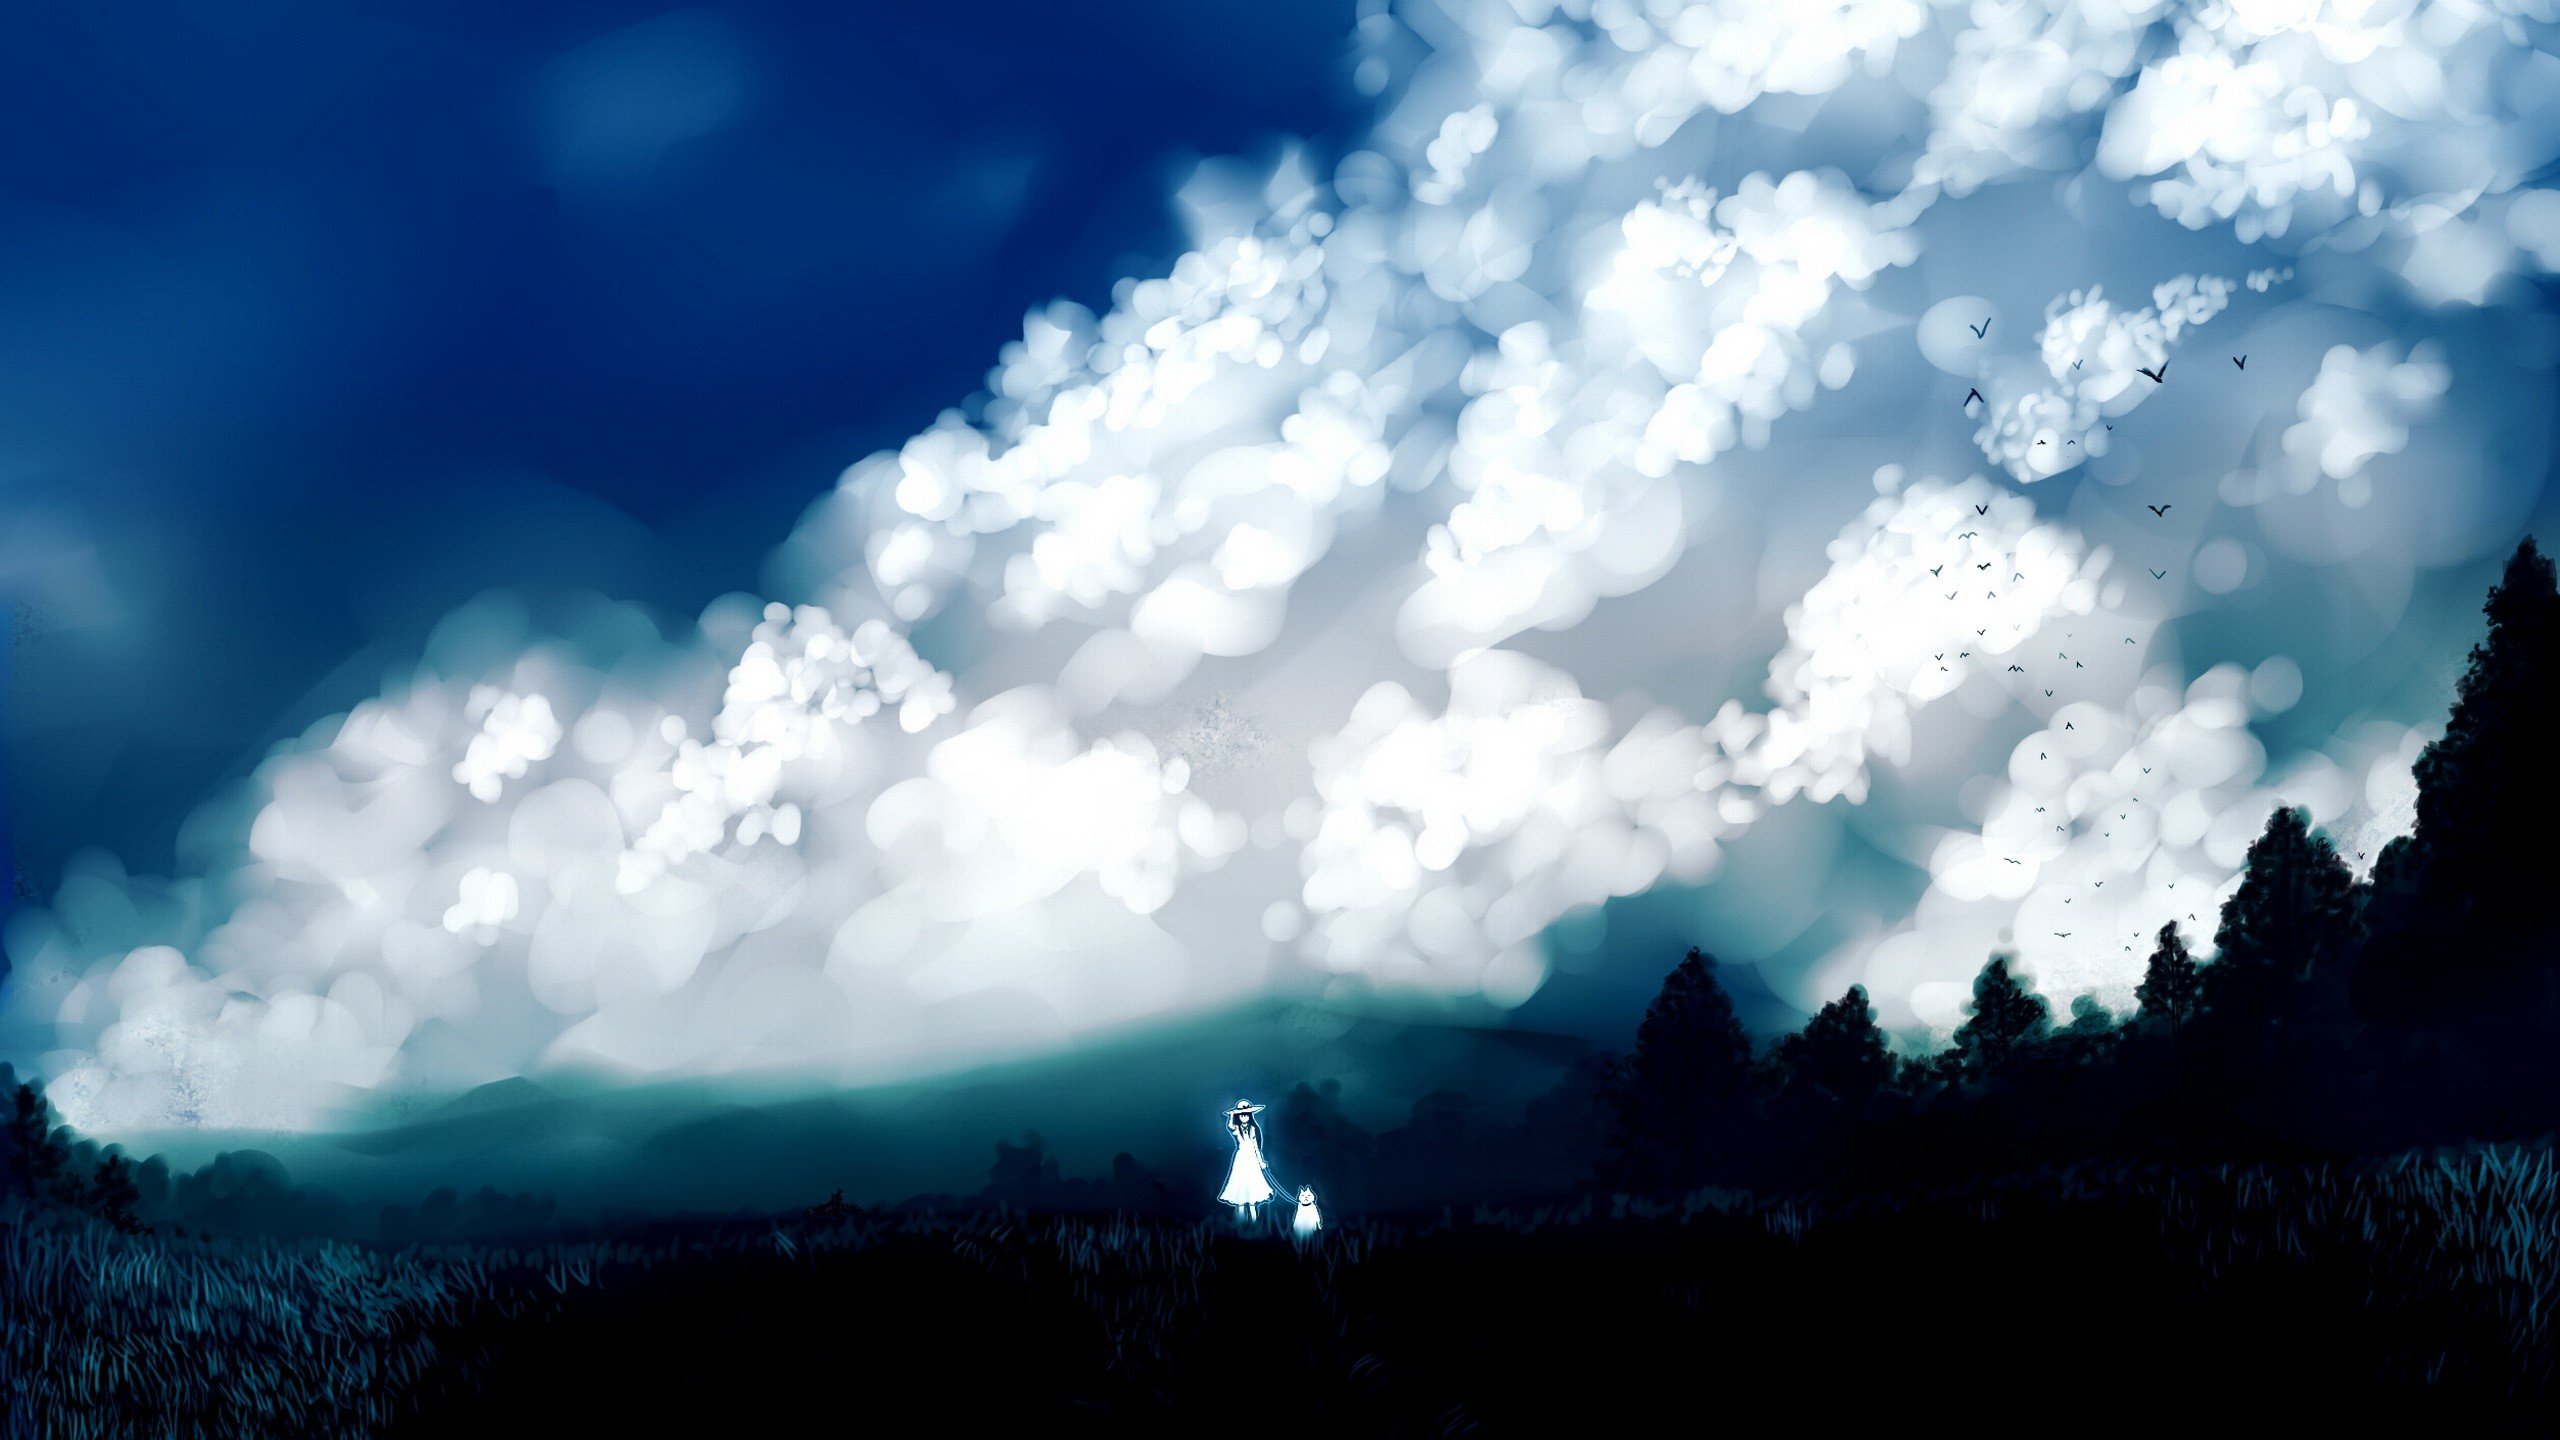 clouds, Landscapes, Nature, Trees, Dress, Forests, Birds, Grass, Dogs, Long, Hair, Outdoors, Scenic, White, Dress, Skyscapes, Hats, Anime, Girls, Black, Hair, Skies, Original, Characters Wallpaper